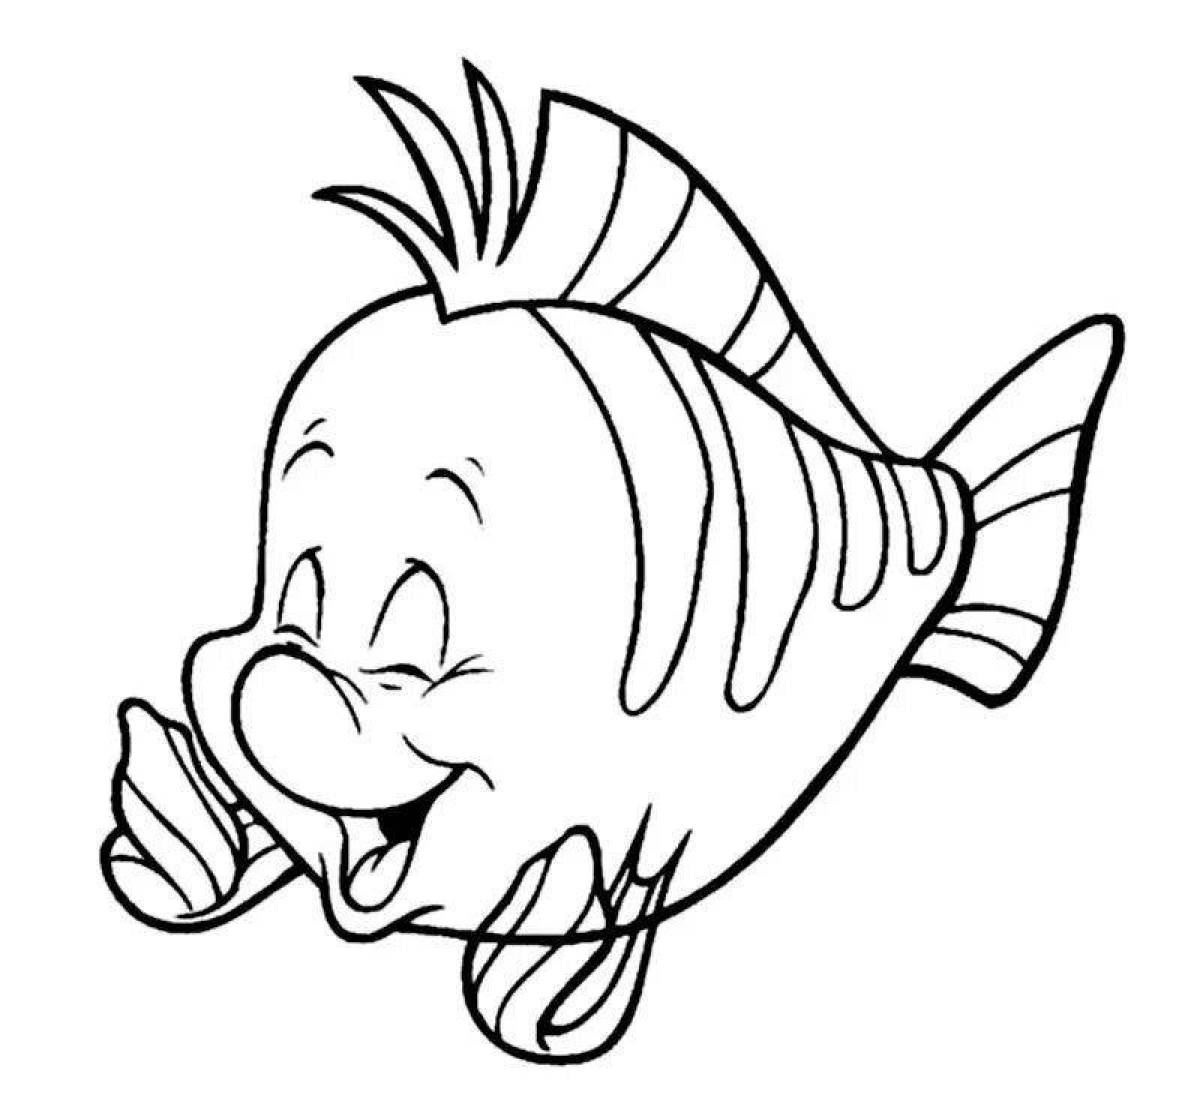 Bright float coloring page